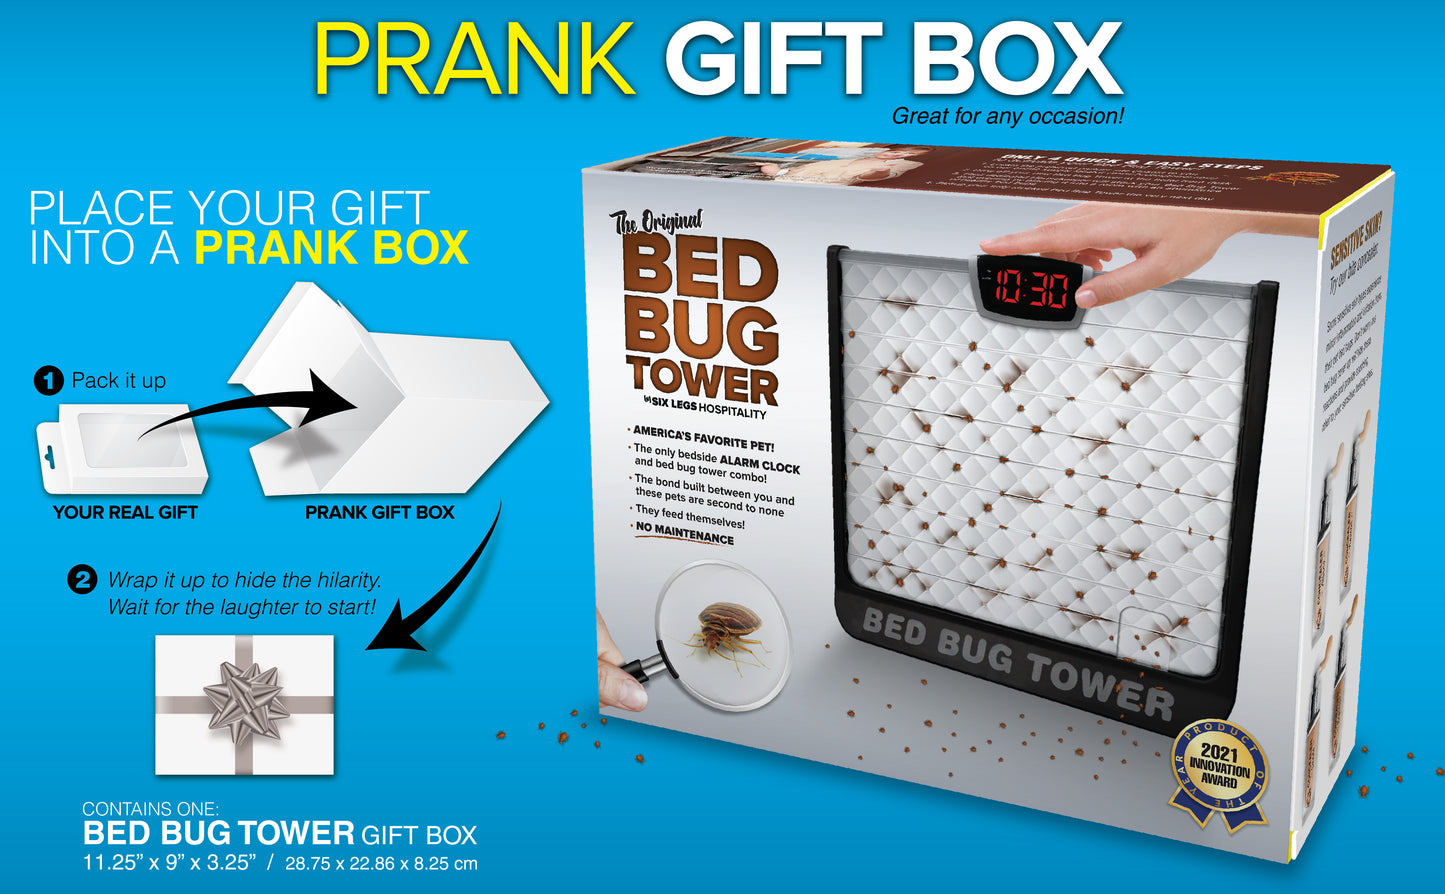 Prank Gift Boxes  Drink Wisconsinbly  Drink Wisconsinbly